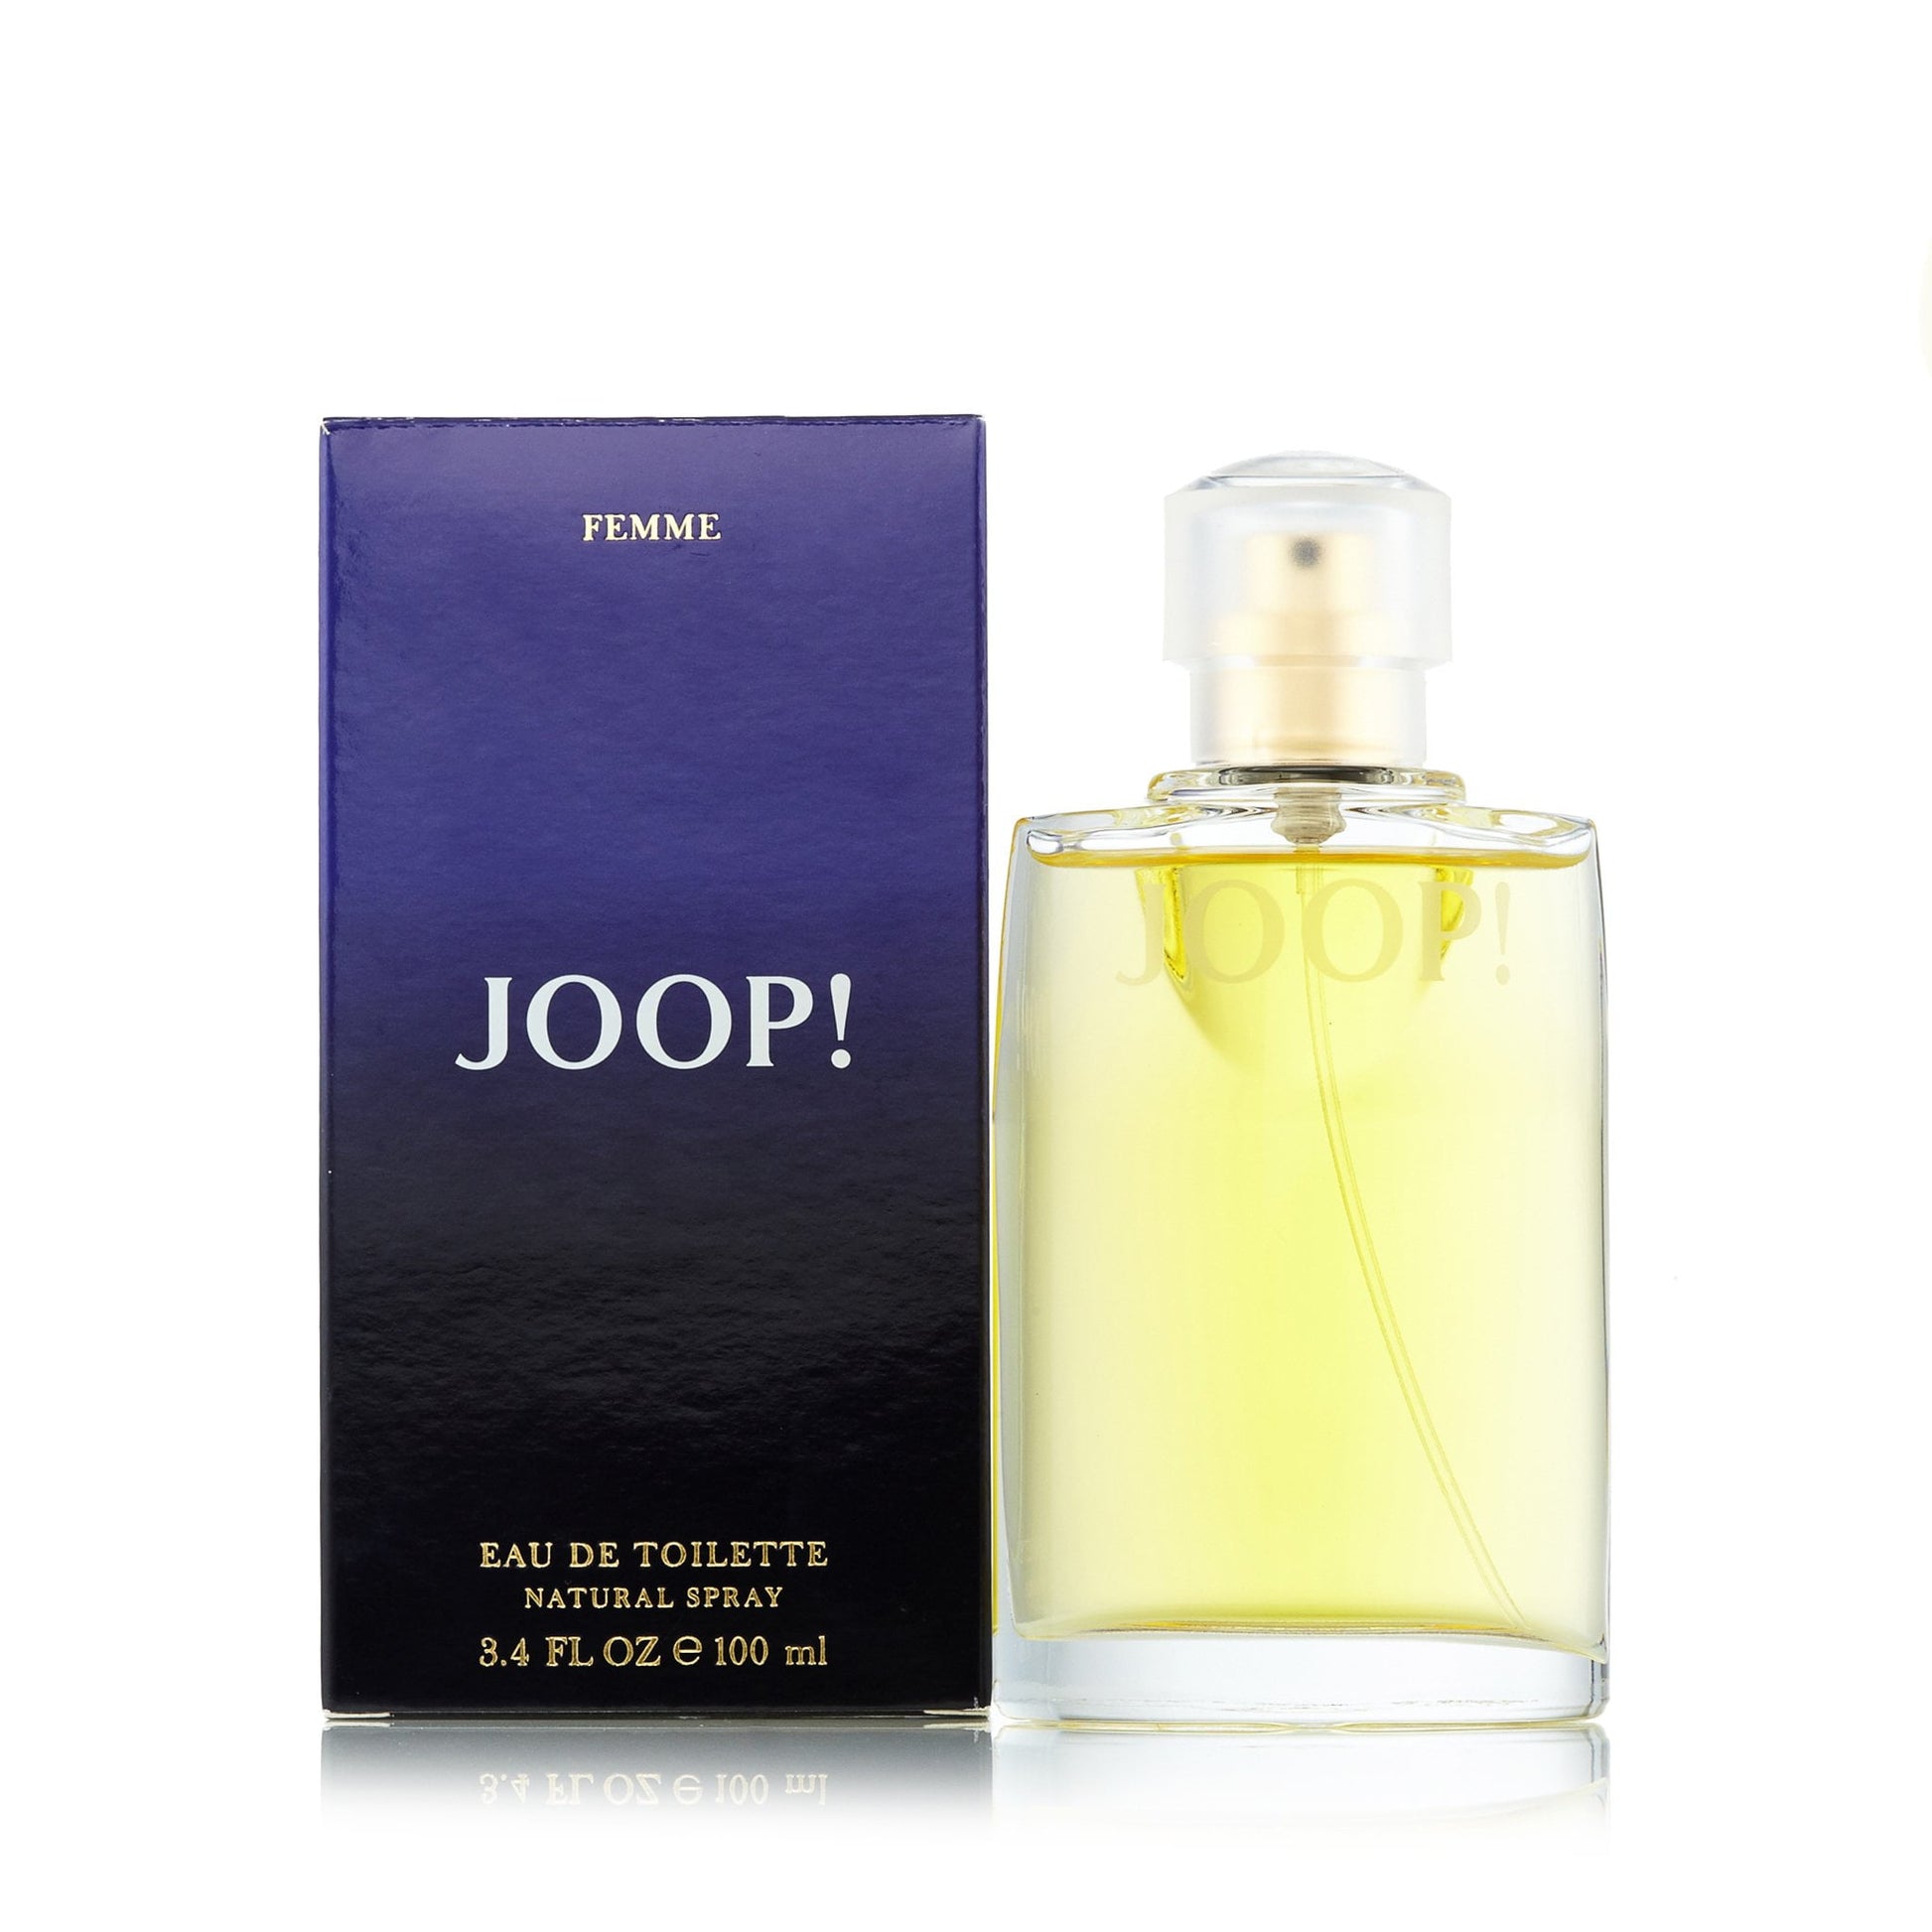 My Looks Man: The New Face of Wolfgang Joop ~ Fragrance Reviews